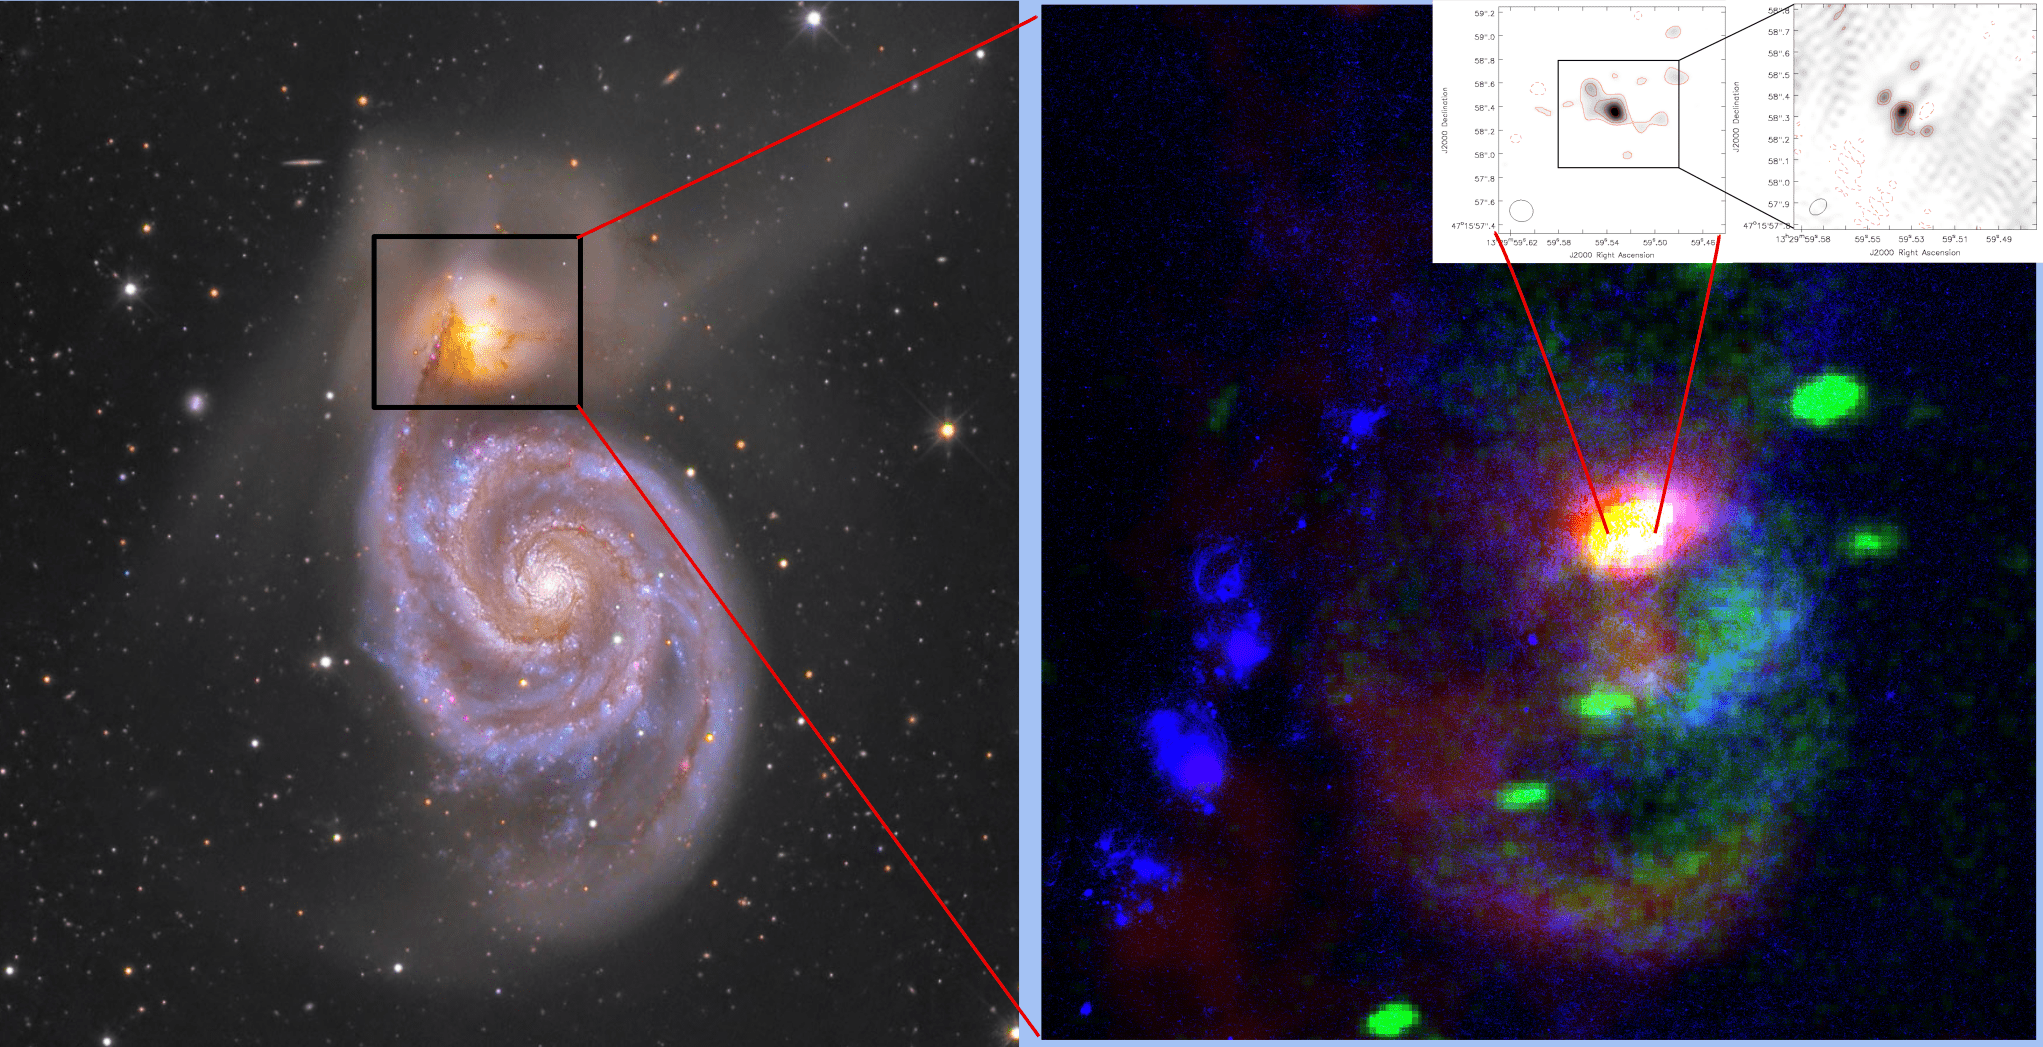 Letf: Image of the Whirlpool galaxy and NGC 5195. 
Right: False colour image of NGC 5195 created by combining the VLA 20 cm radio image (red), the Chandra X-ray image (green), and the Hubble Space telescope H-alpha image (blue). 
Image credits Jon Christensen.